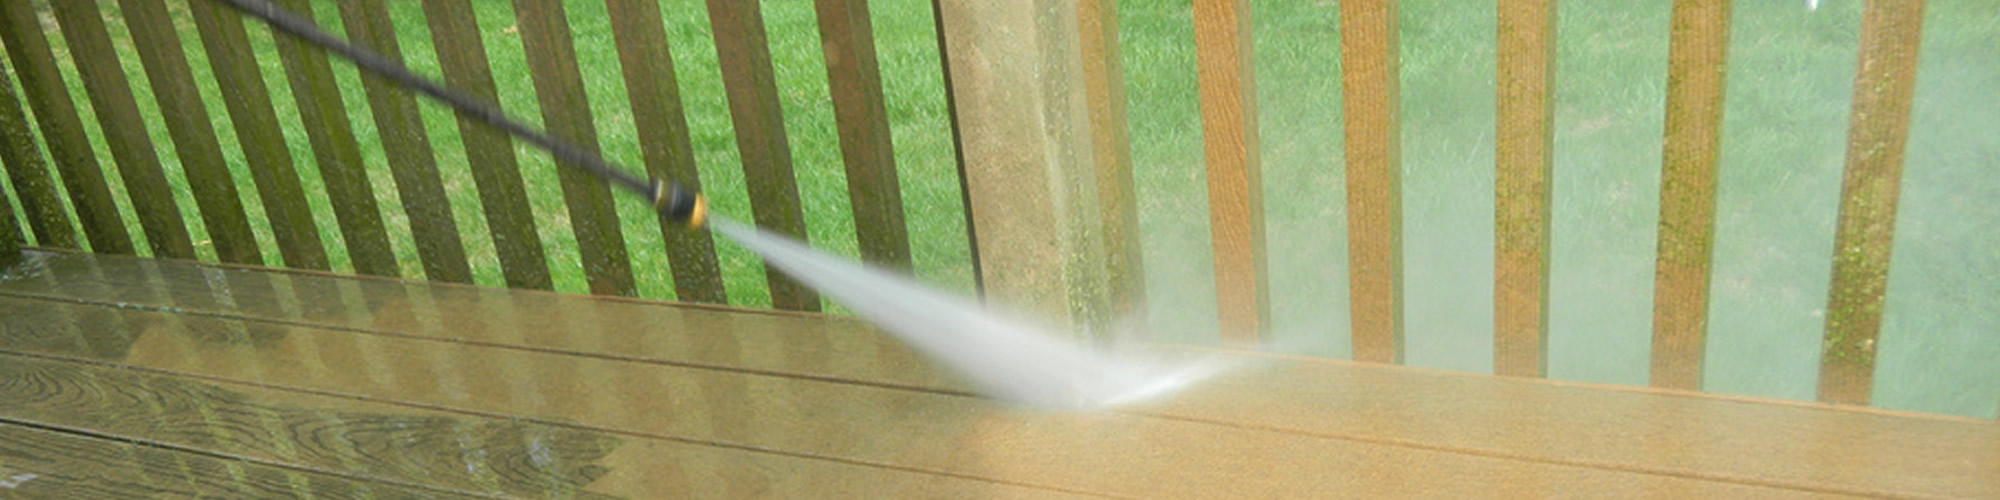 Power Washing Services New Berlin Wisconsin